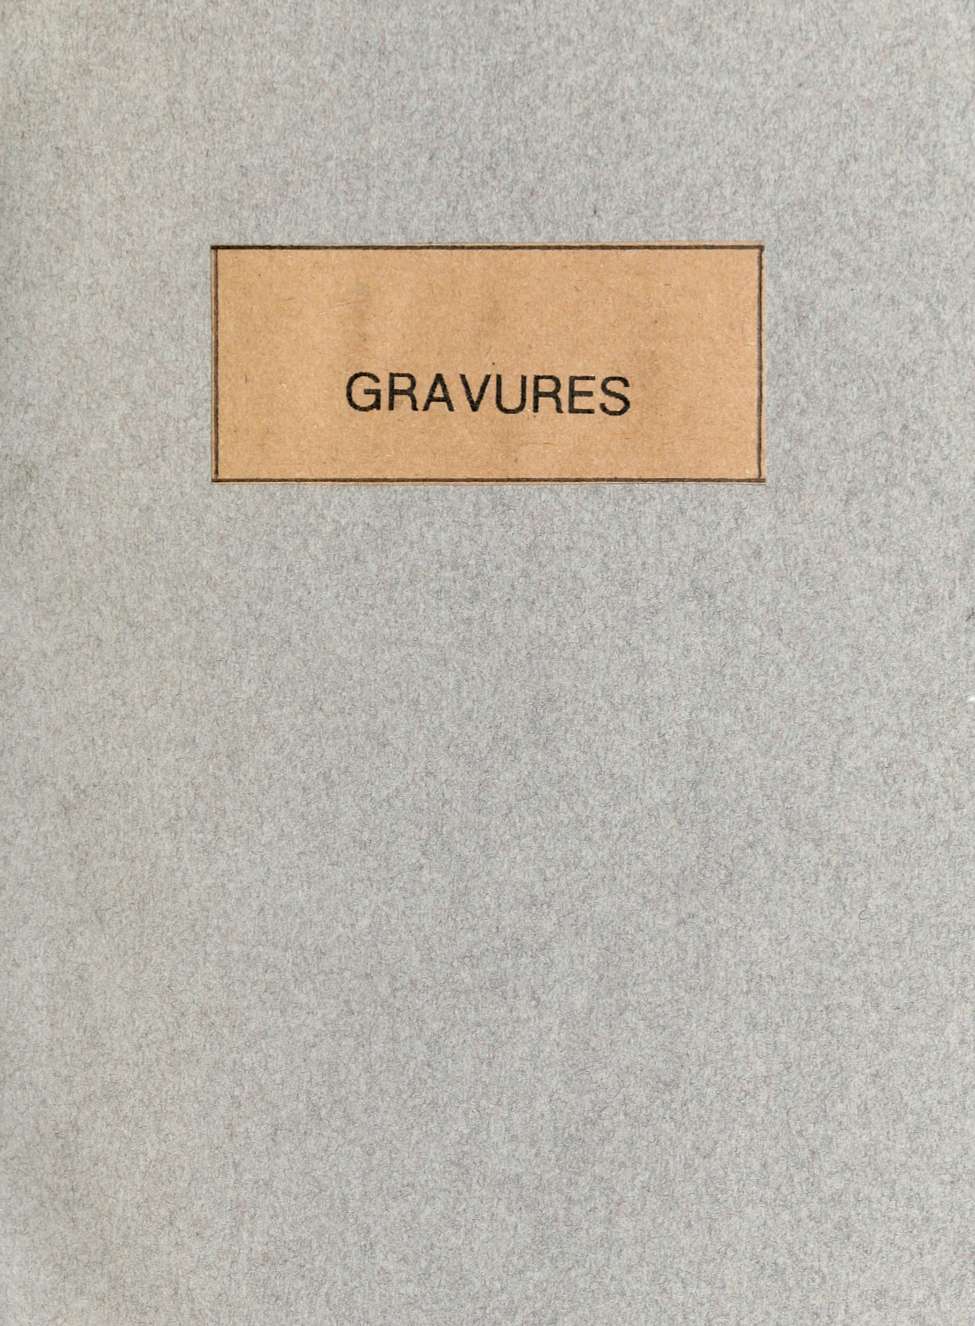 Comic Book Cover For Gravures